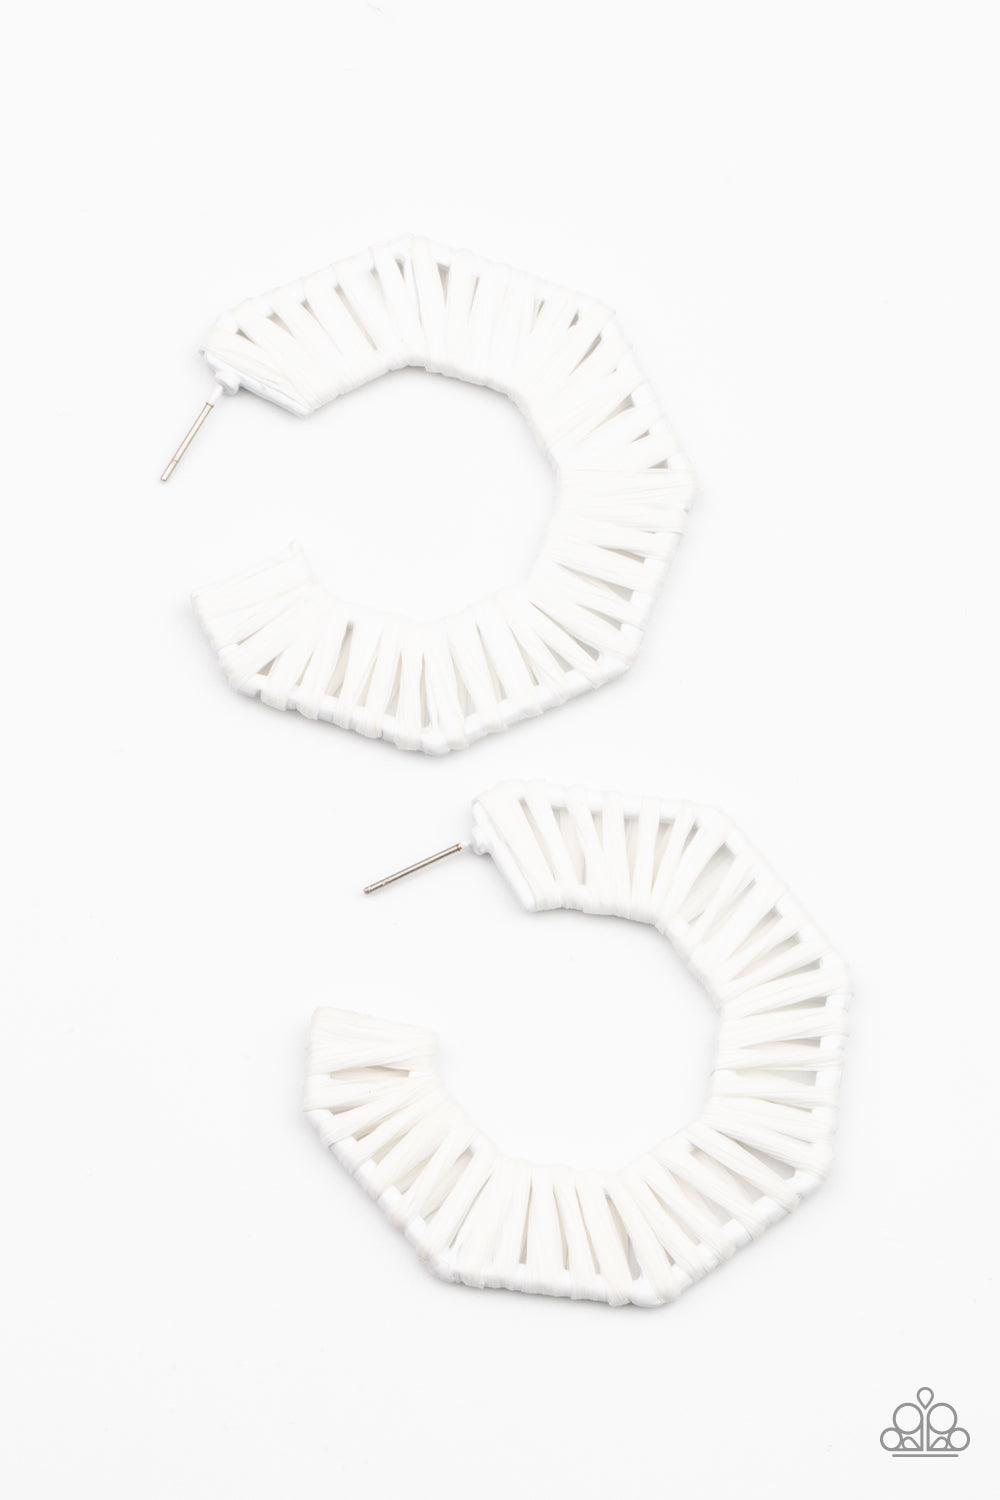 Paparazzi Accessories Fabulously Fiesta - White White wicker-like cording is wrapped around a hexagonal hoop, creating a colorful pop of color. Earring attaches to a standard post fitting. Hoop measures approximately 2" in diameter. Sold as one pair of ho